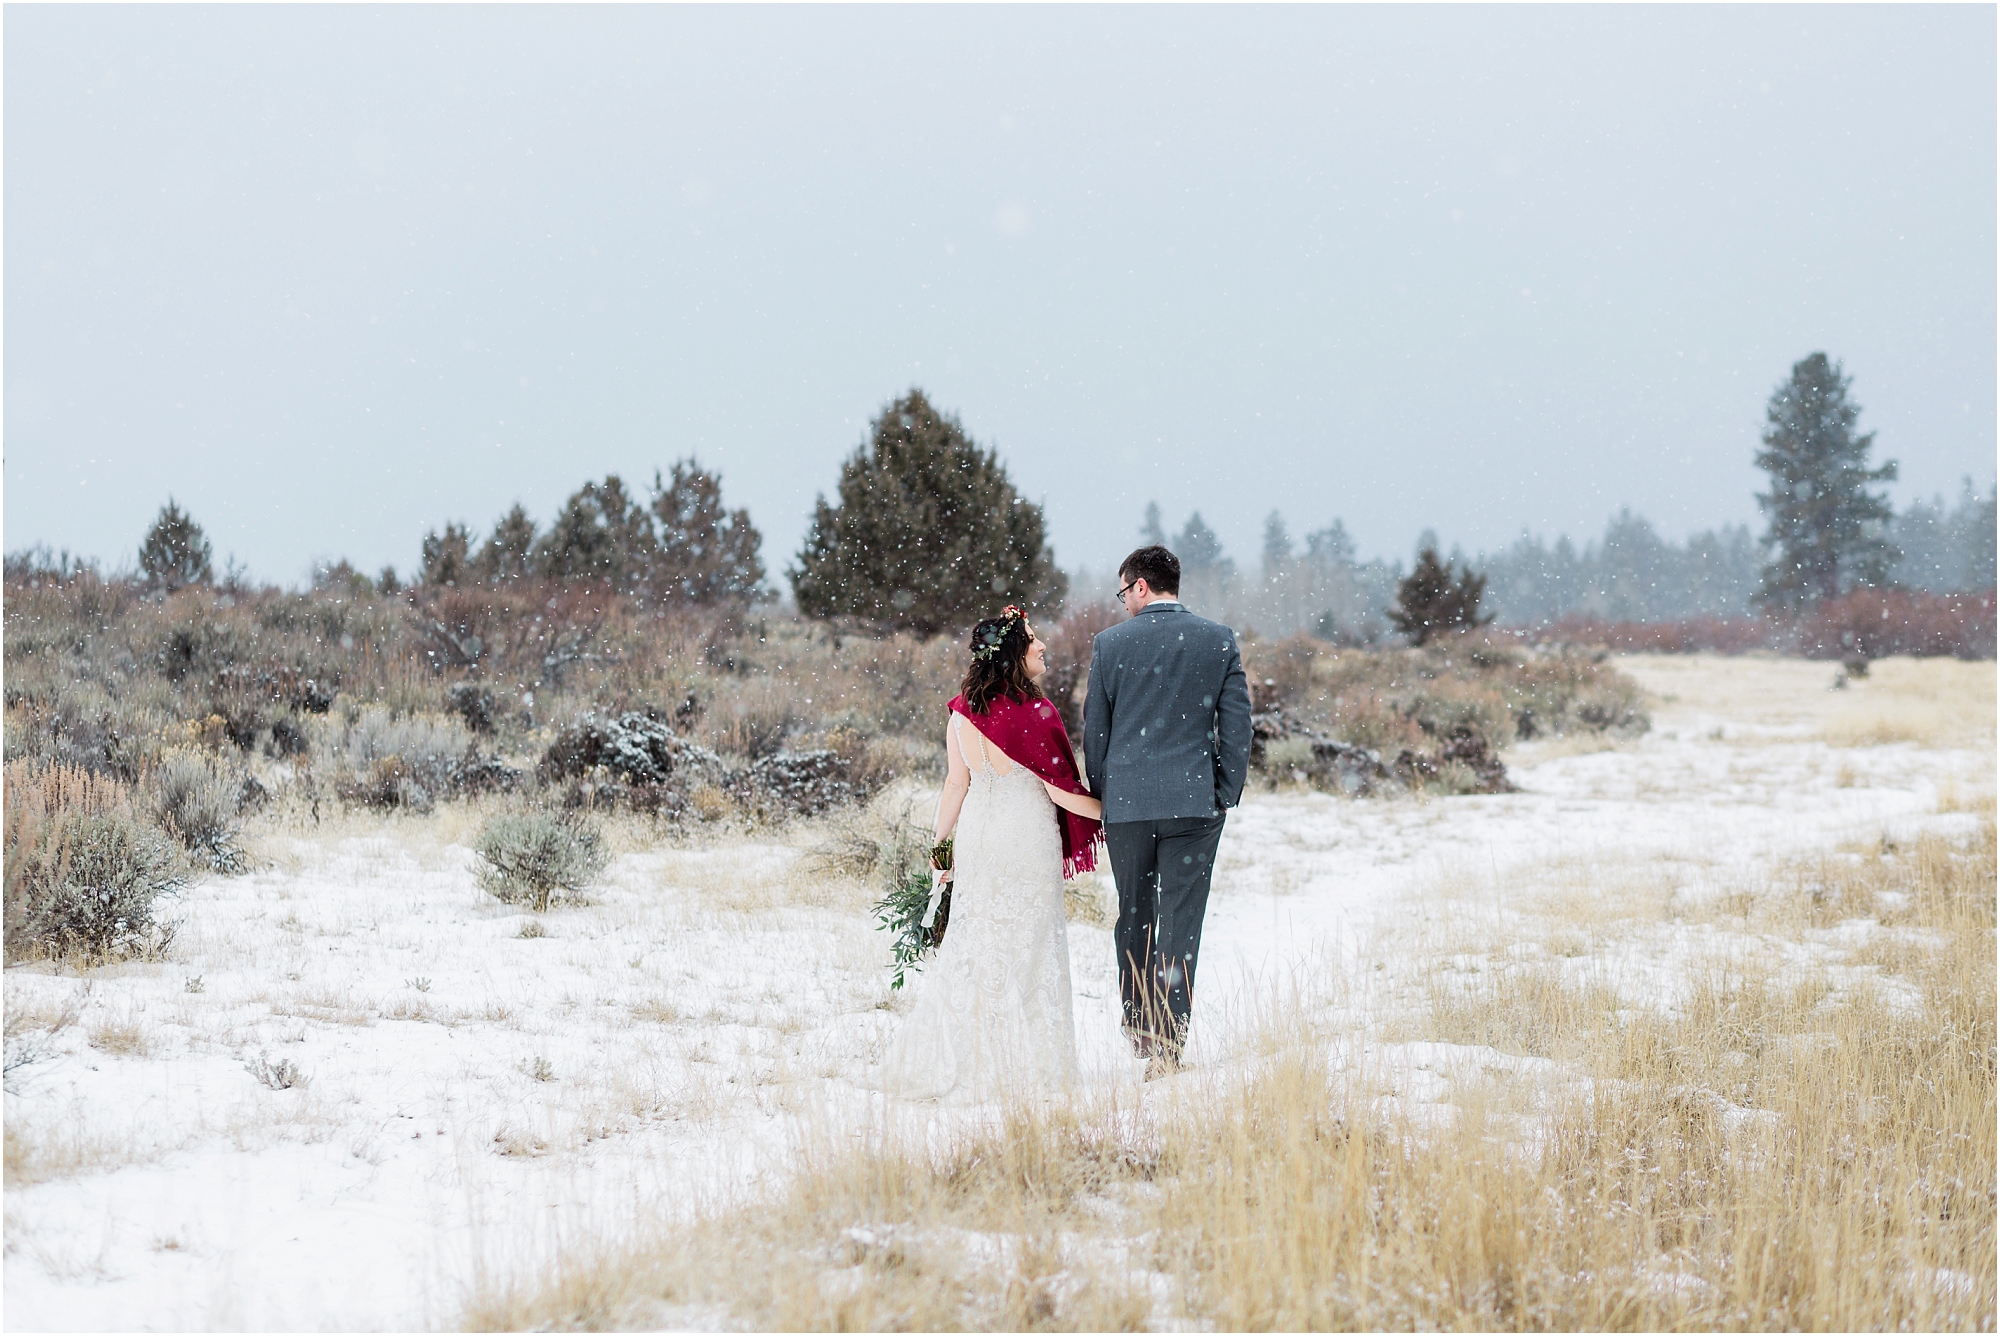 A bride wearing white with a red shawl, and a groom with a gray suit with burgundy accents walks along a snowy path at their intimate Central Oregon winter elopement near Five Pine Lodge in Sisters. | Erica Swantek Photography